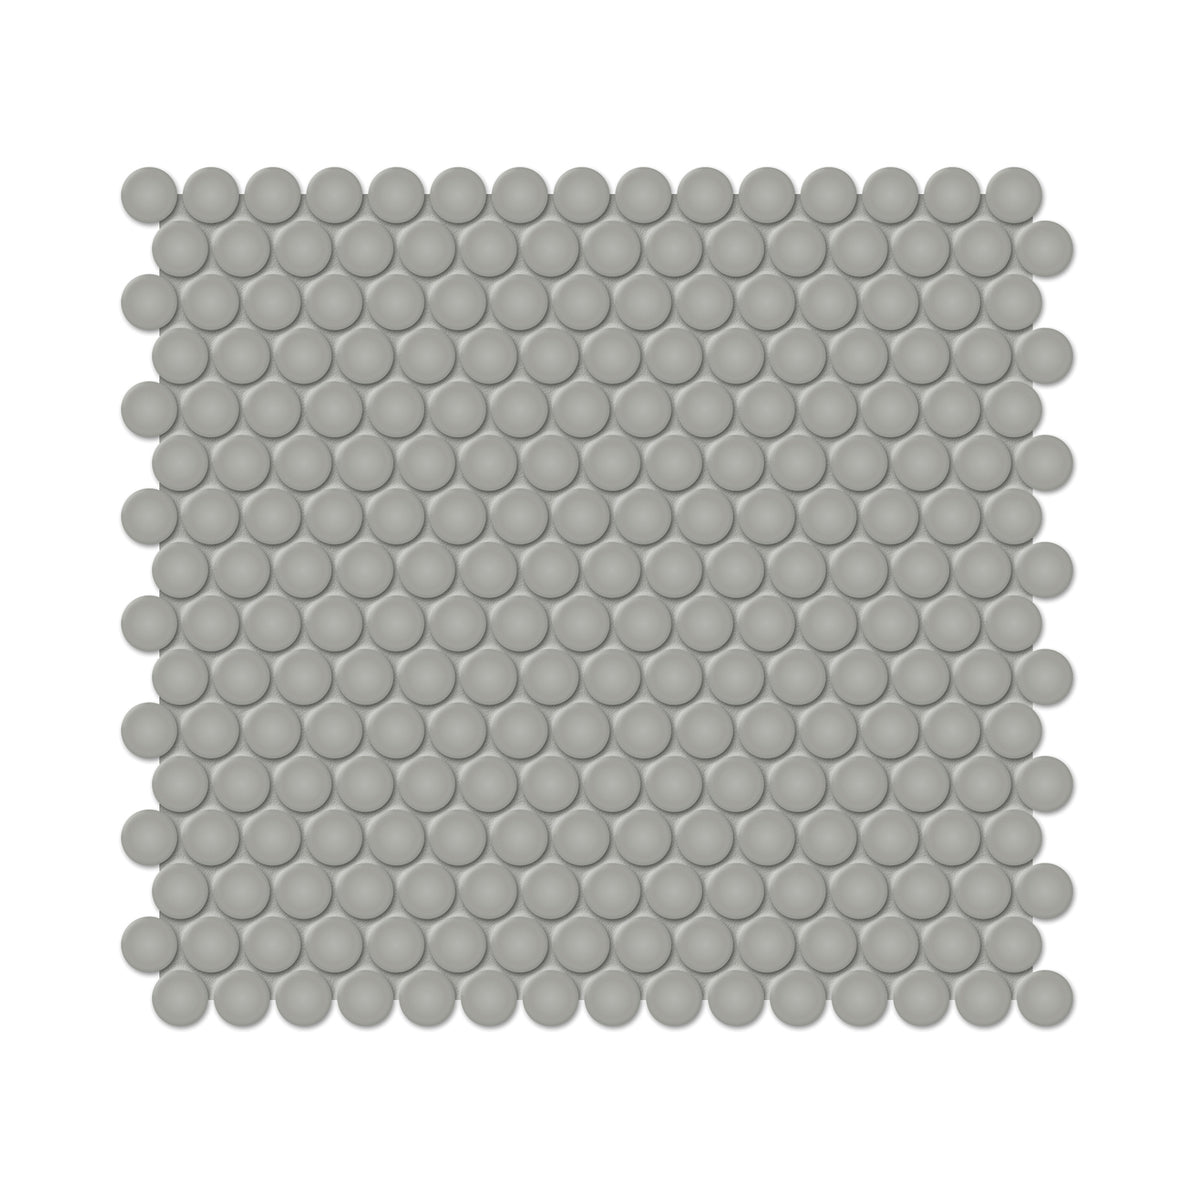 Anatolia - Soho Porcelain - 3/4 in. Penny Round Mosaic - Cement Chic Matte